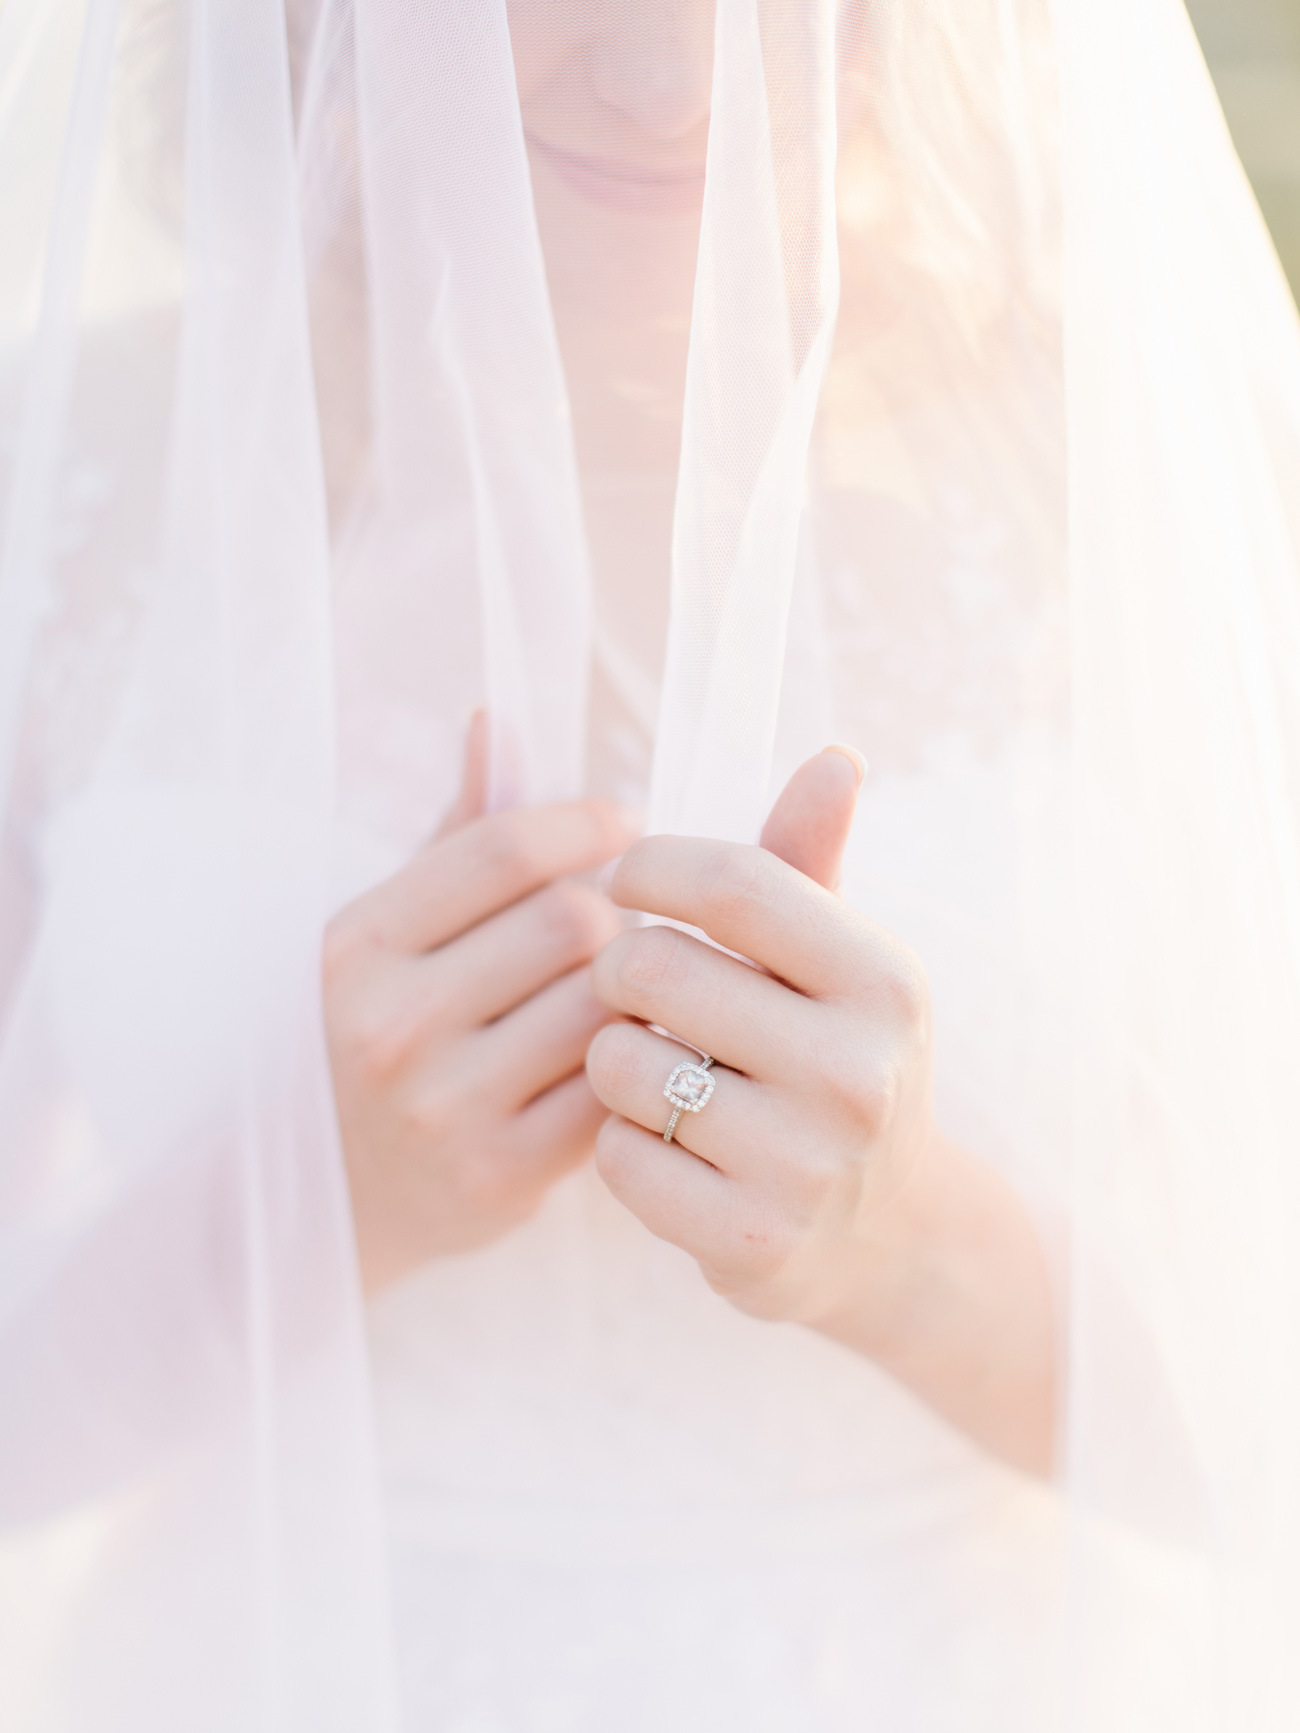 Bride with Veil and Morganite Engagement Ring | Image: Rensche Mari